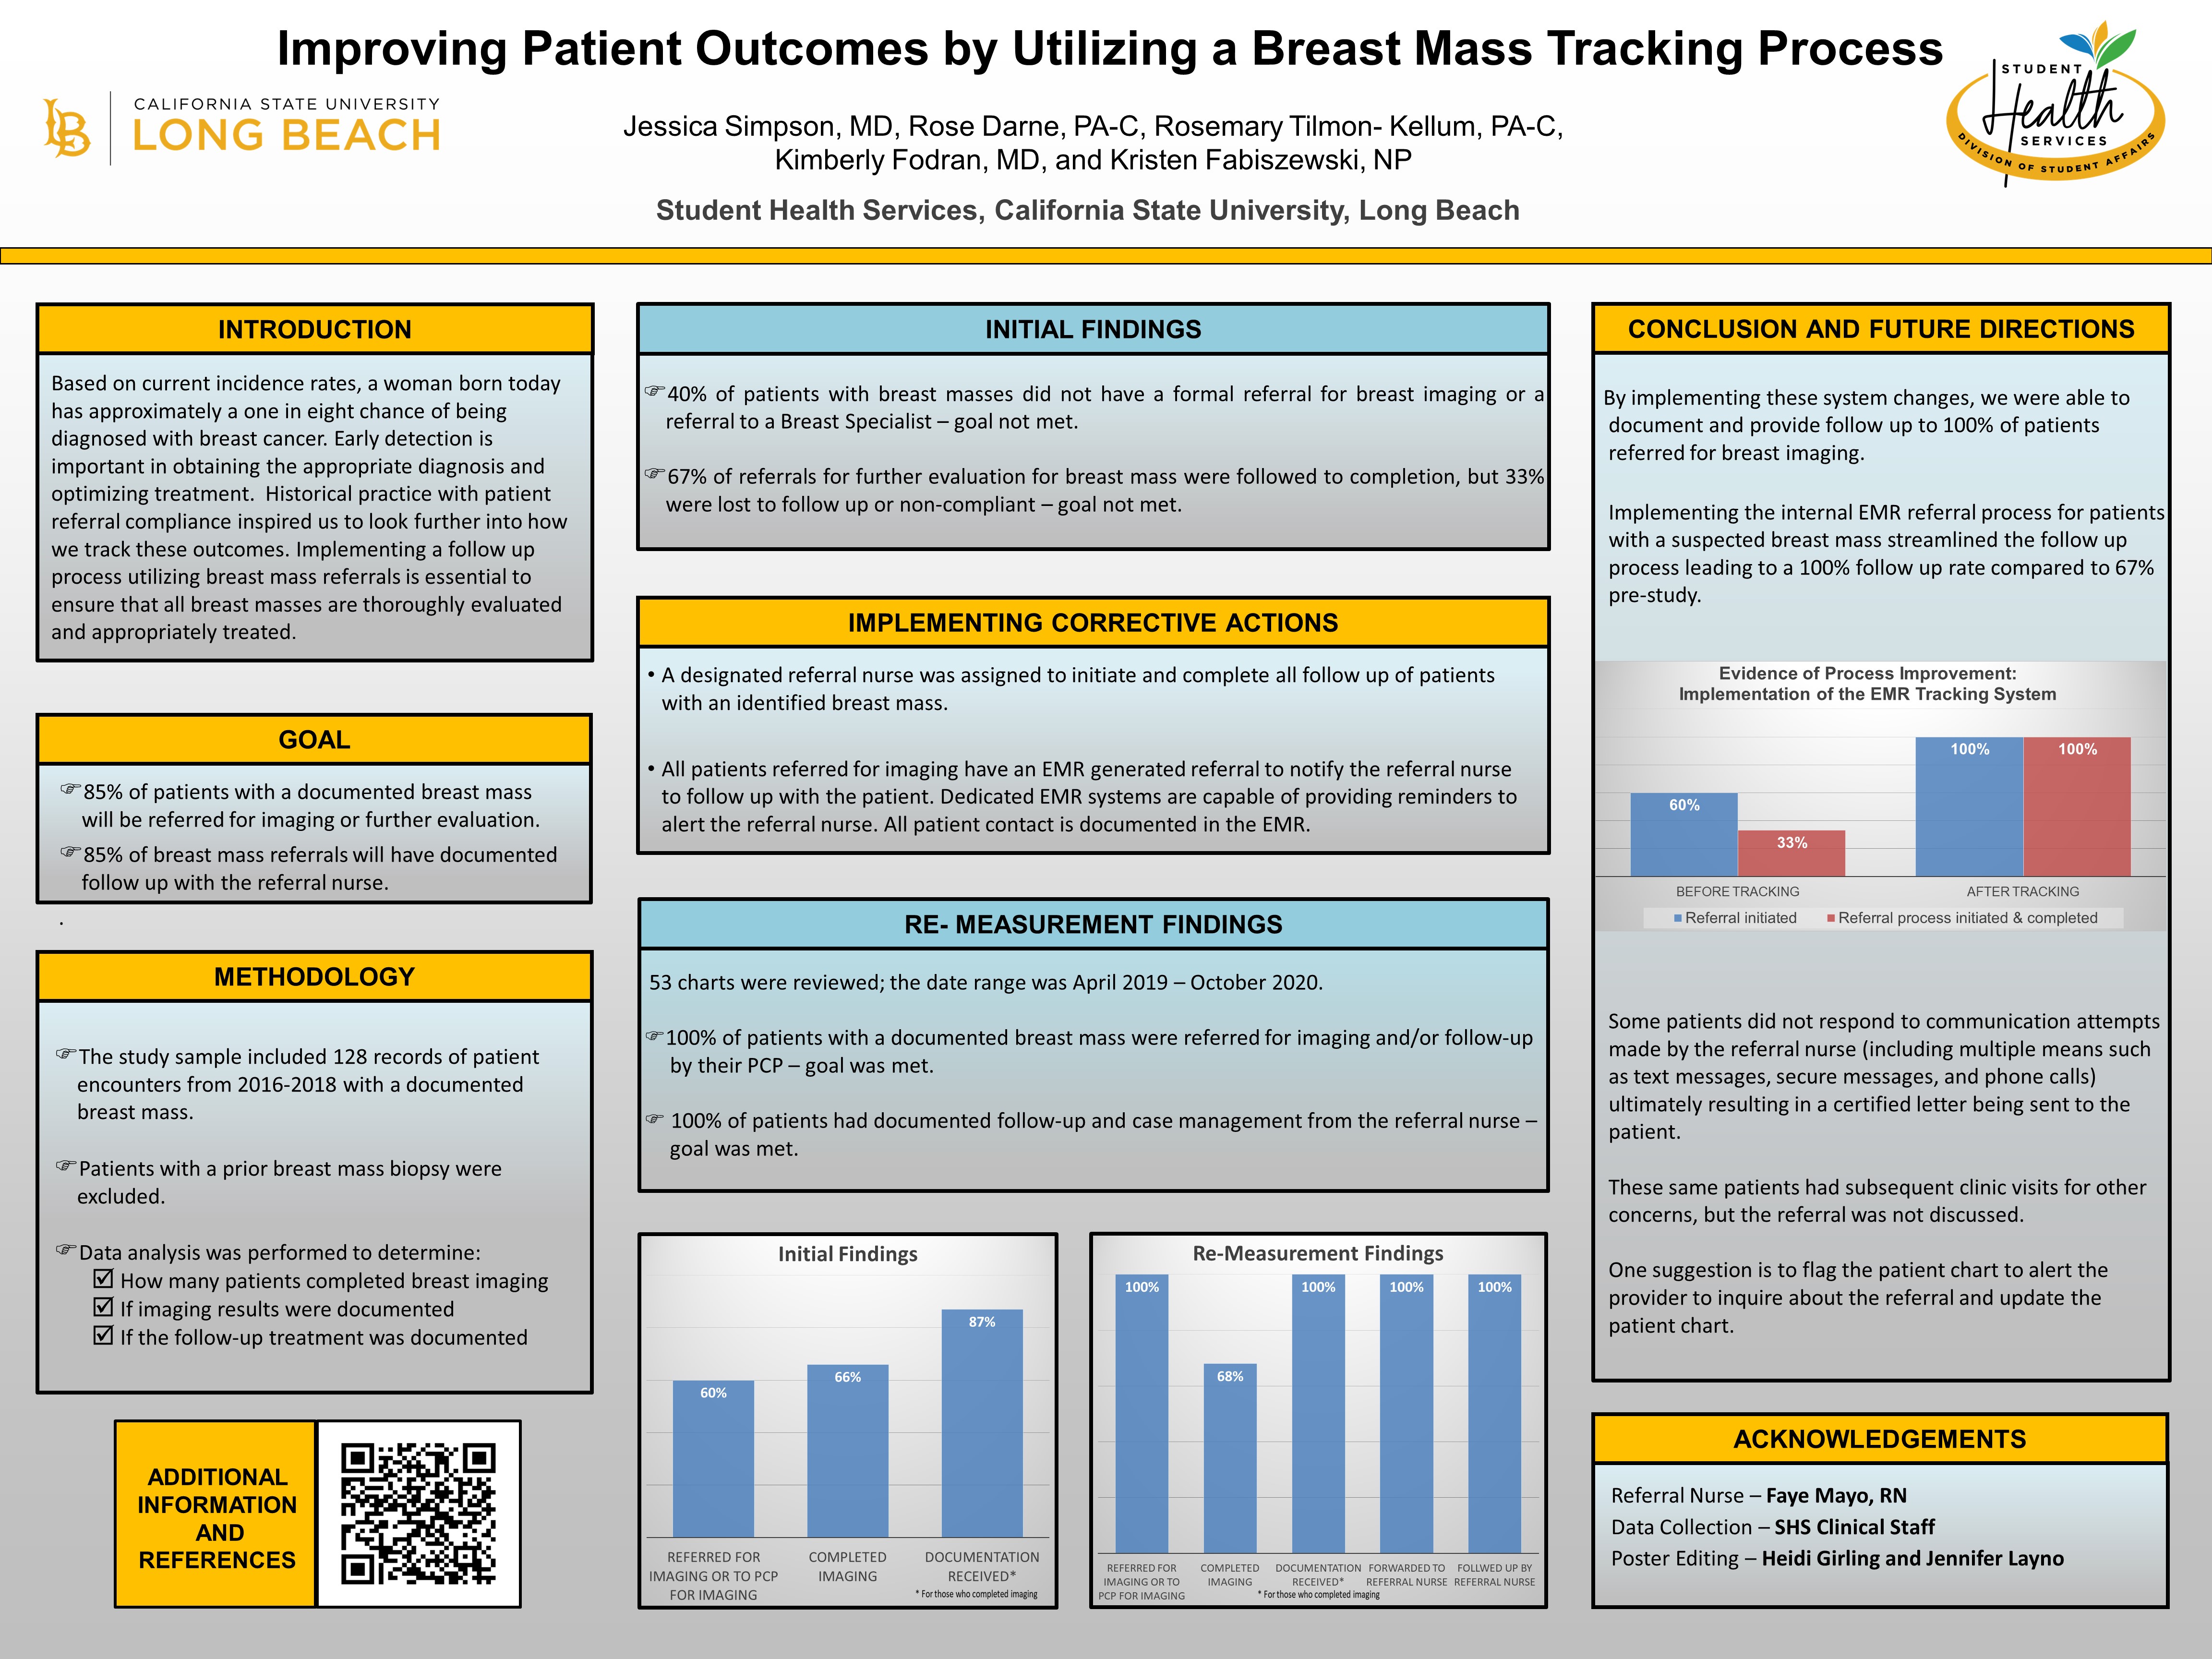 Improving Patient Outcomes by Utilizing a Breast Mass Tracking Process